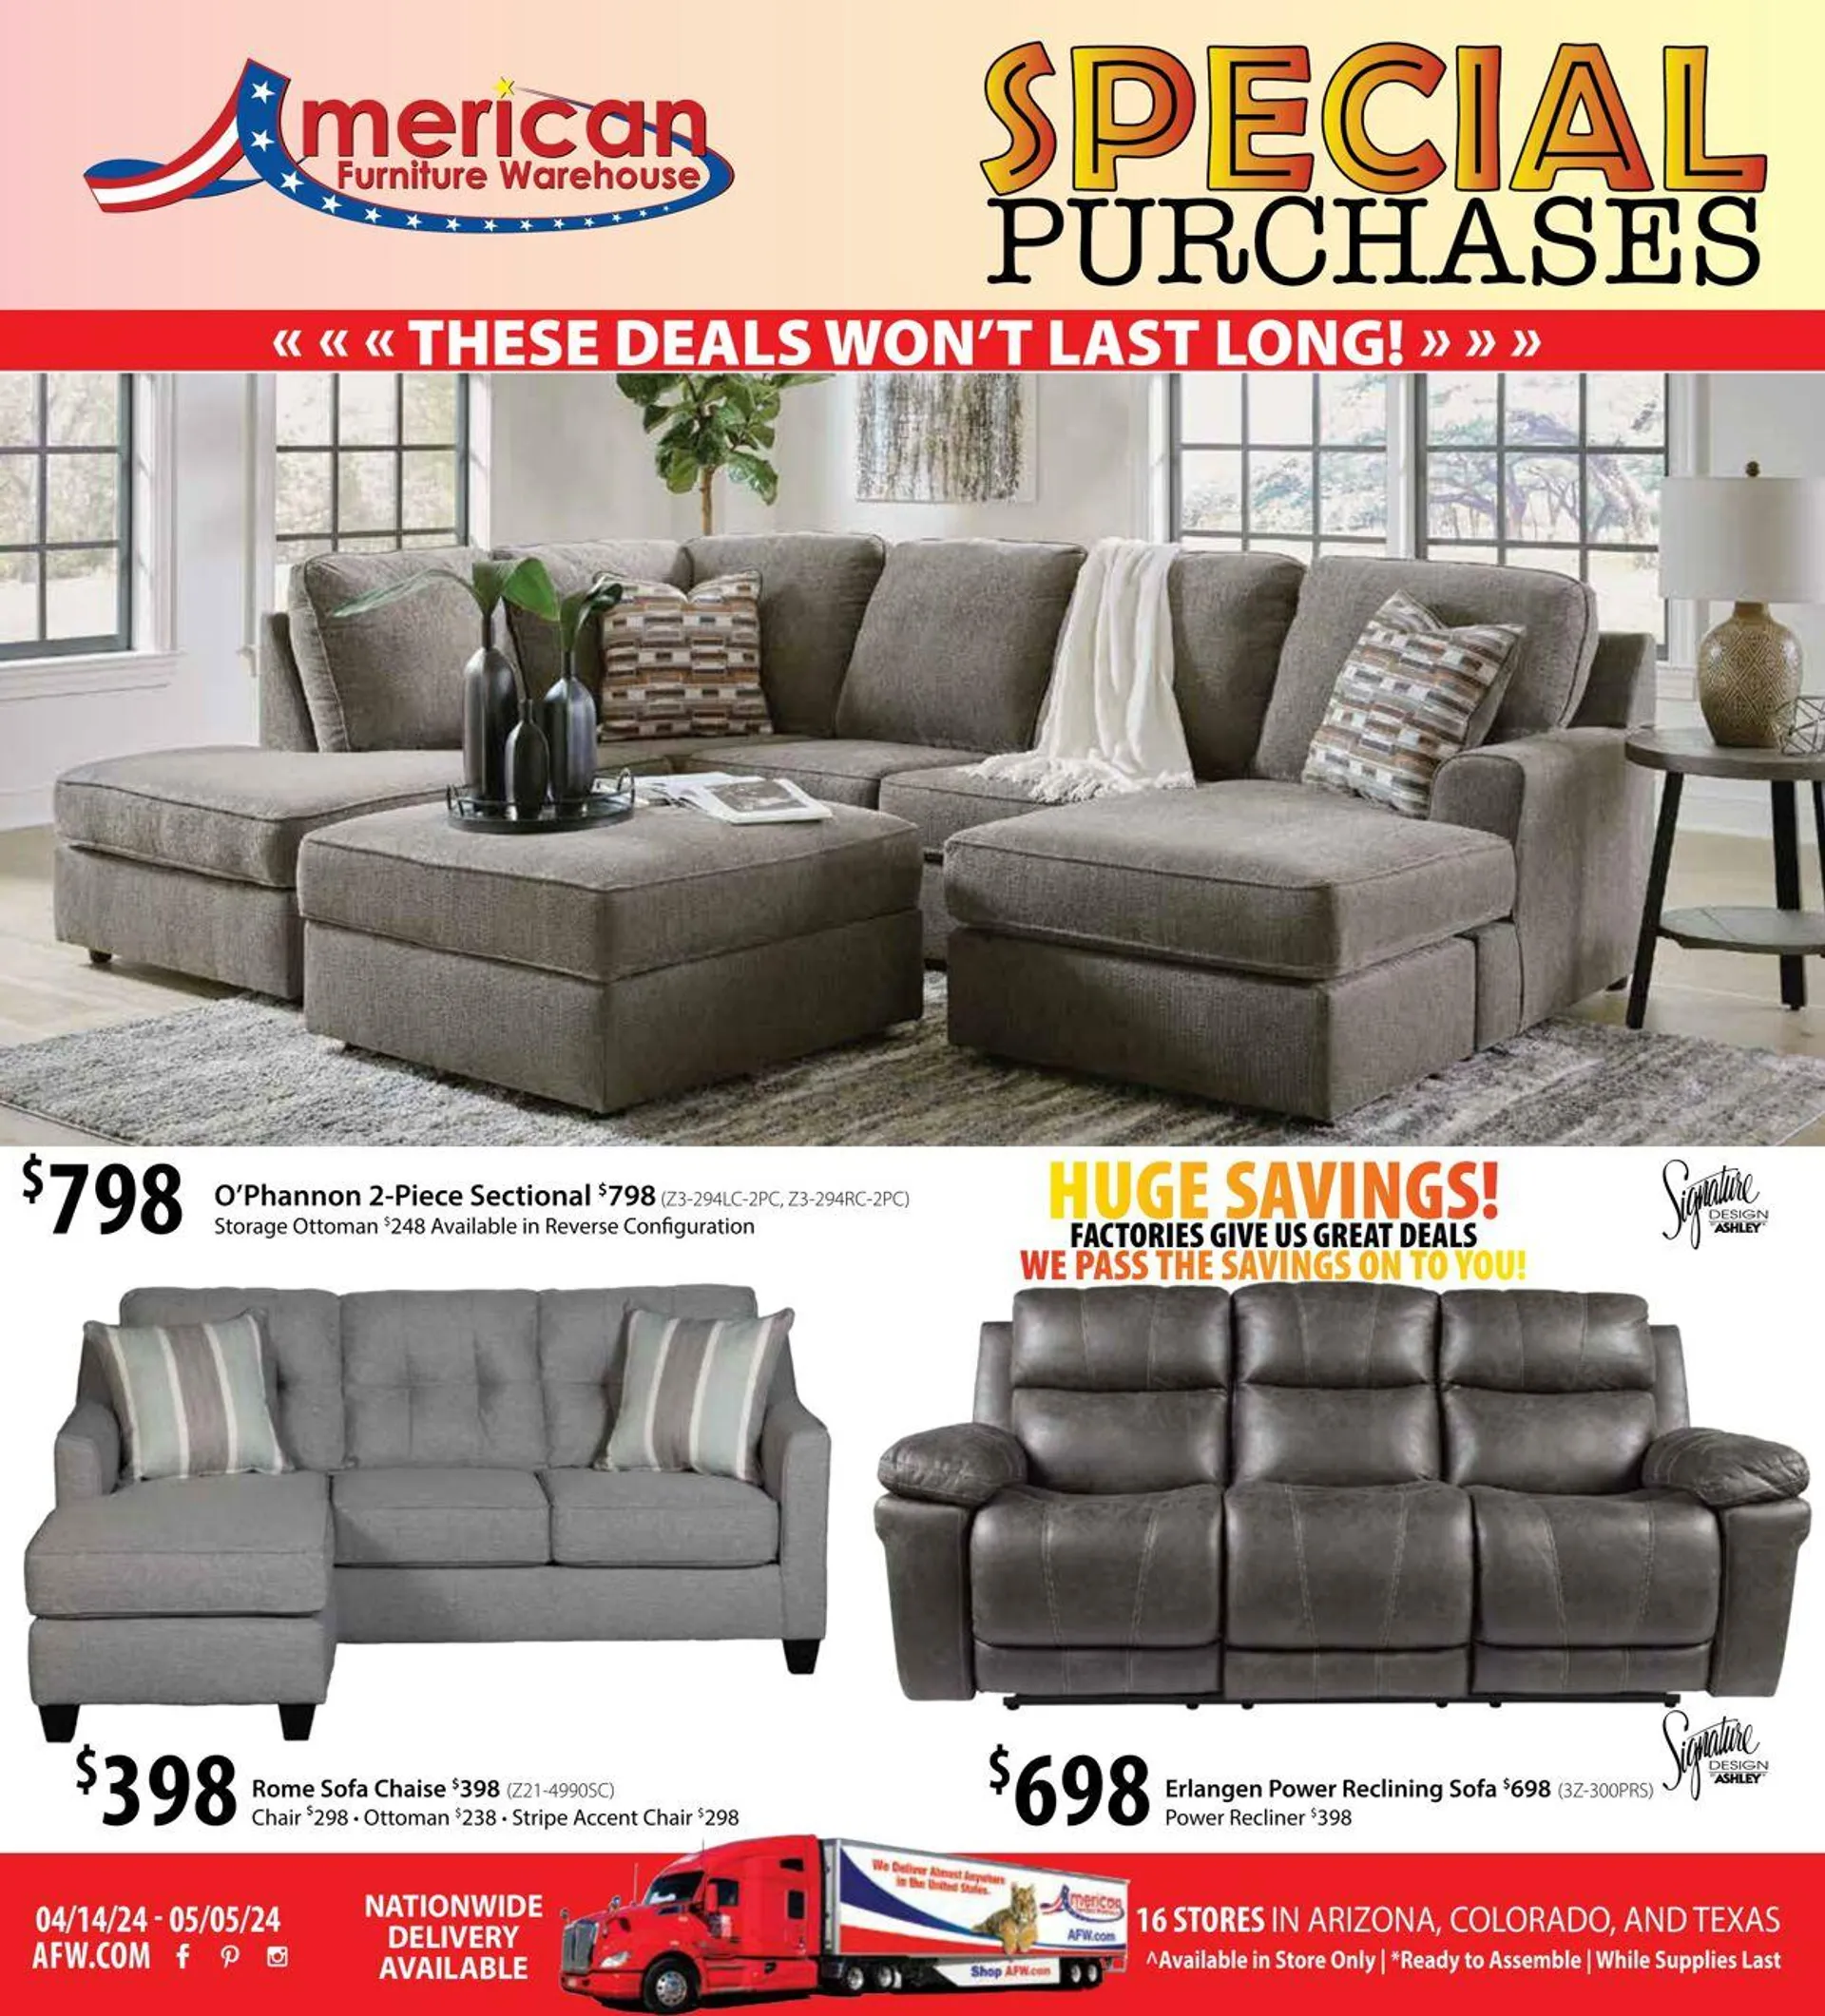 American Furniture Warehouse Current weekly ad - 1